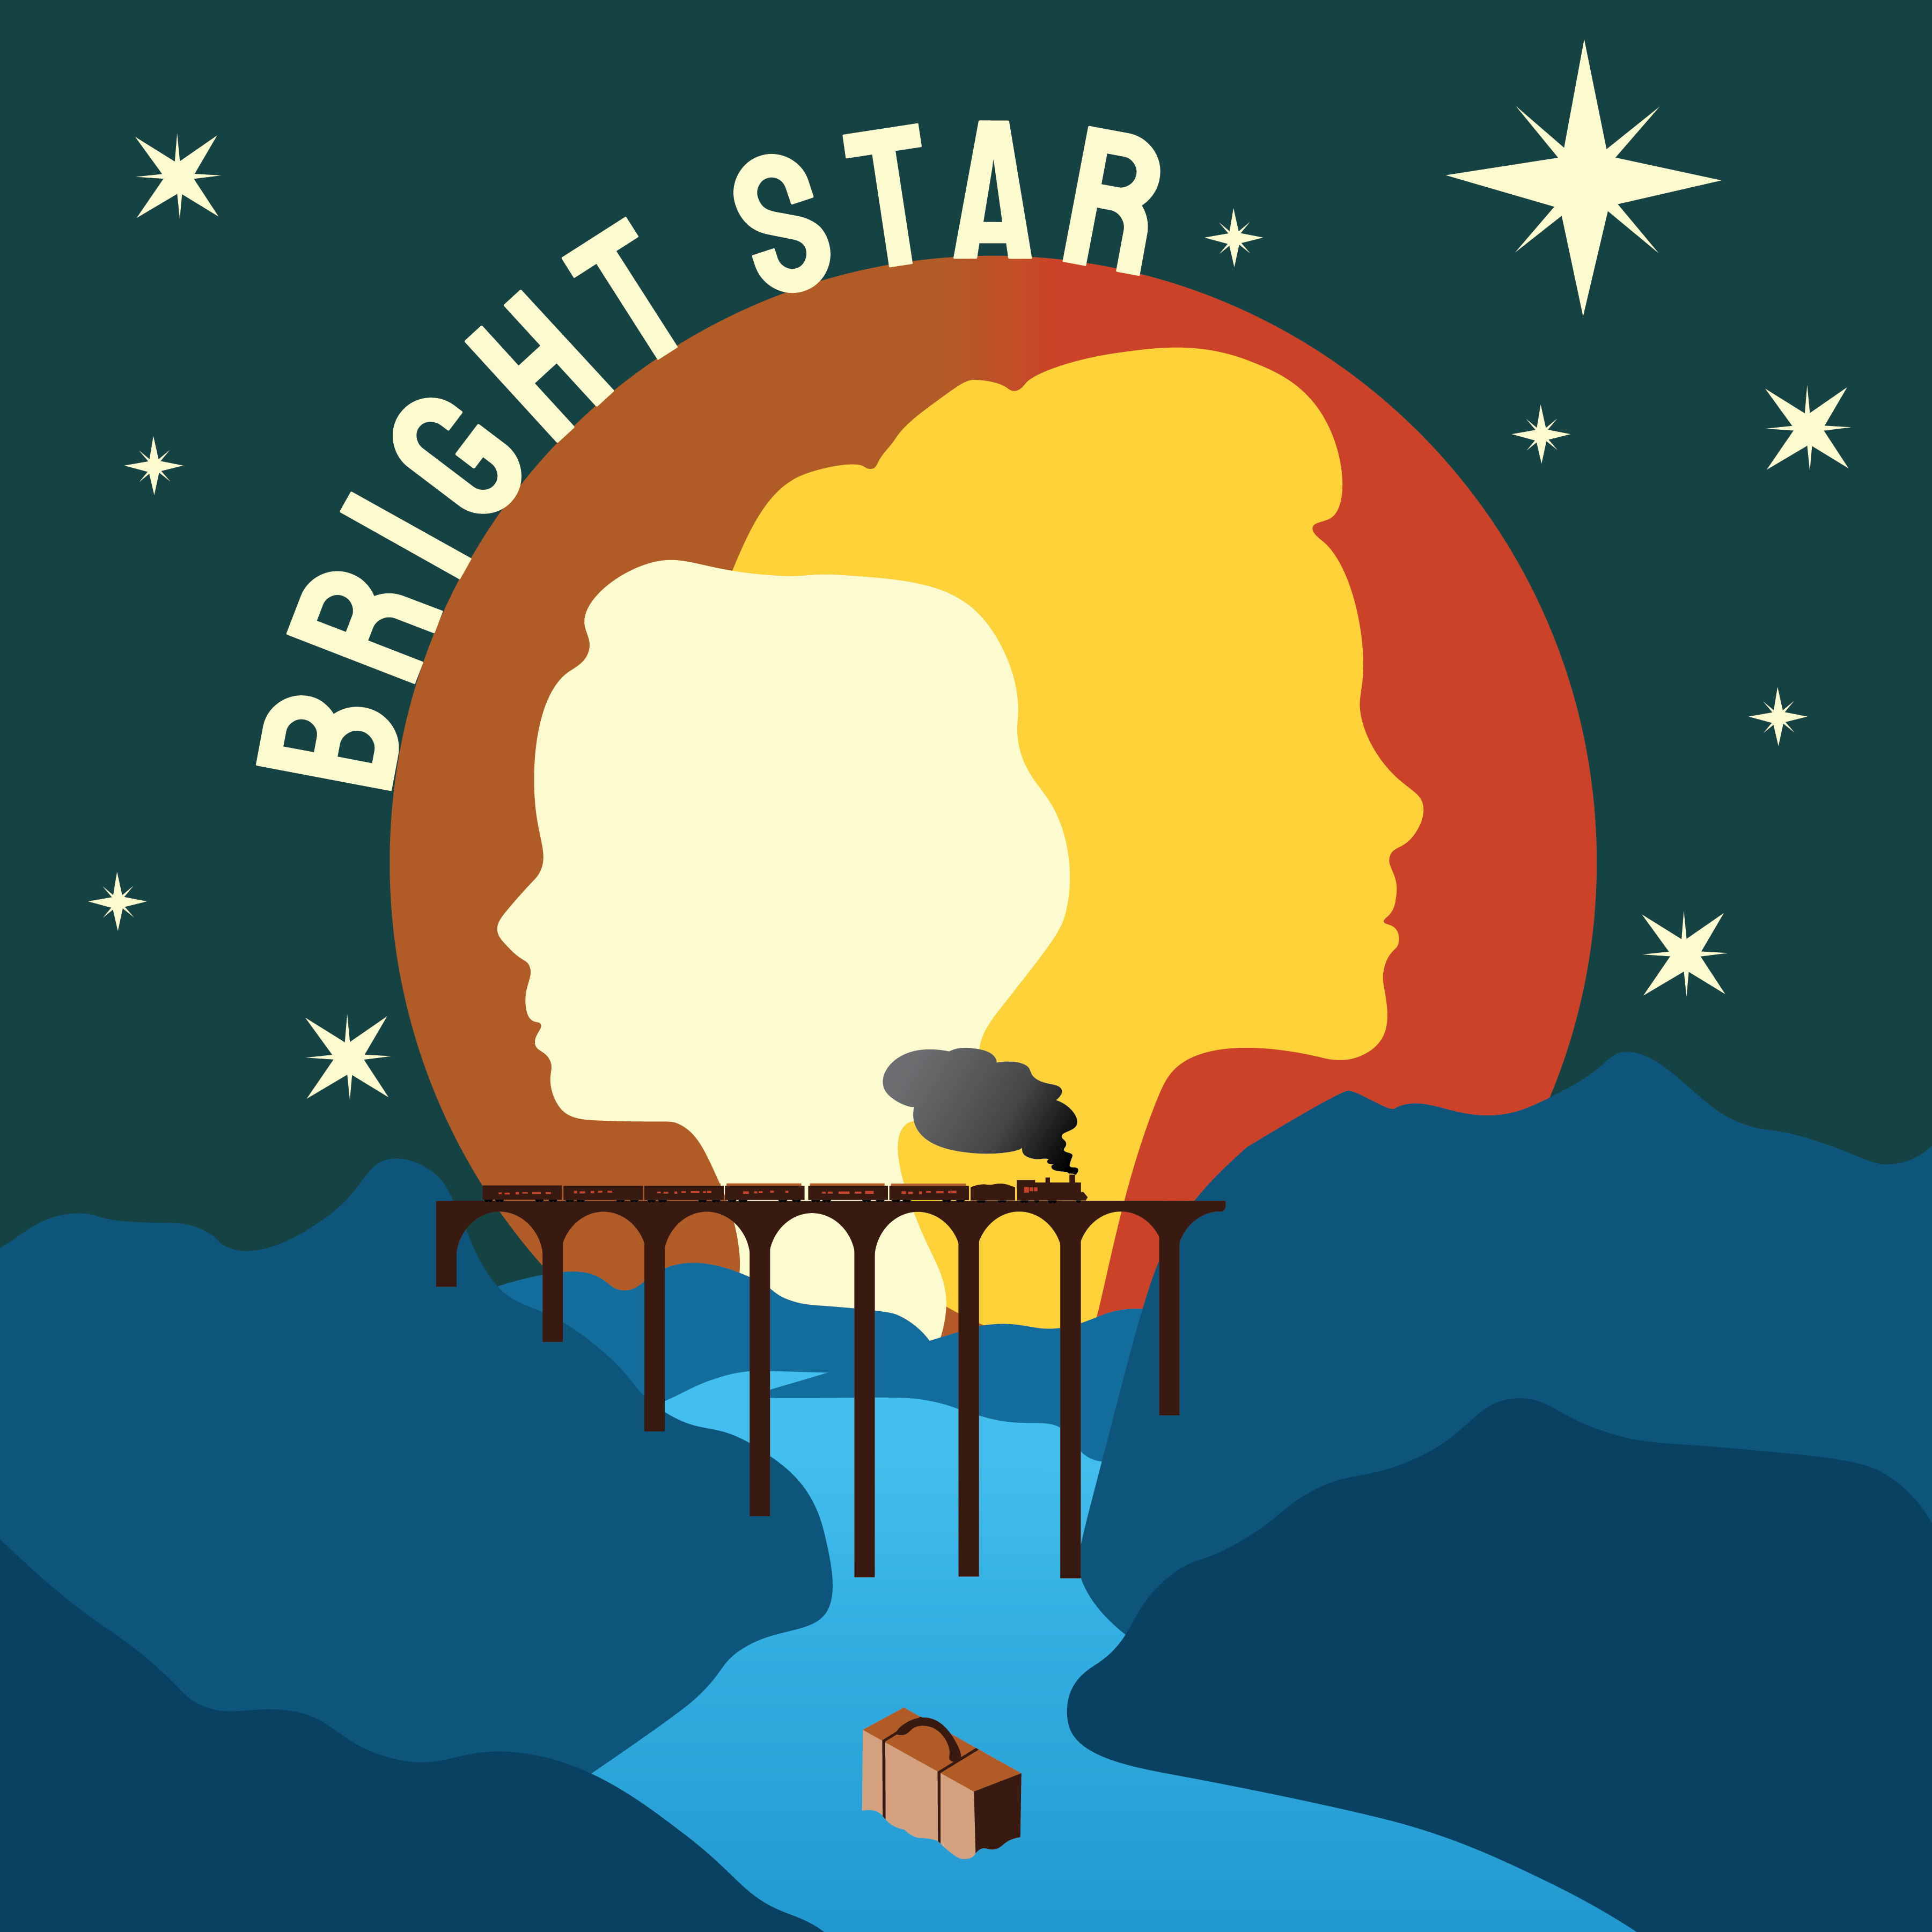 Bright Star musical poster